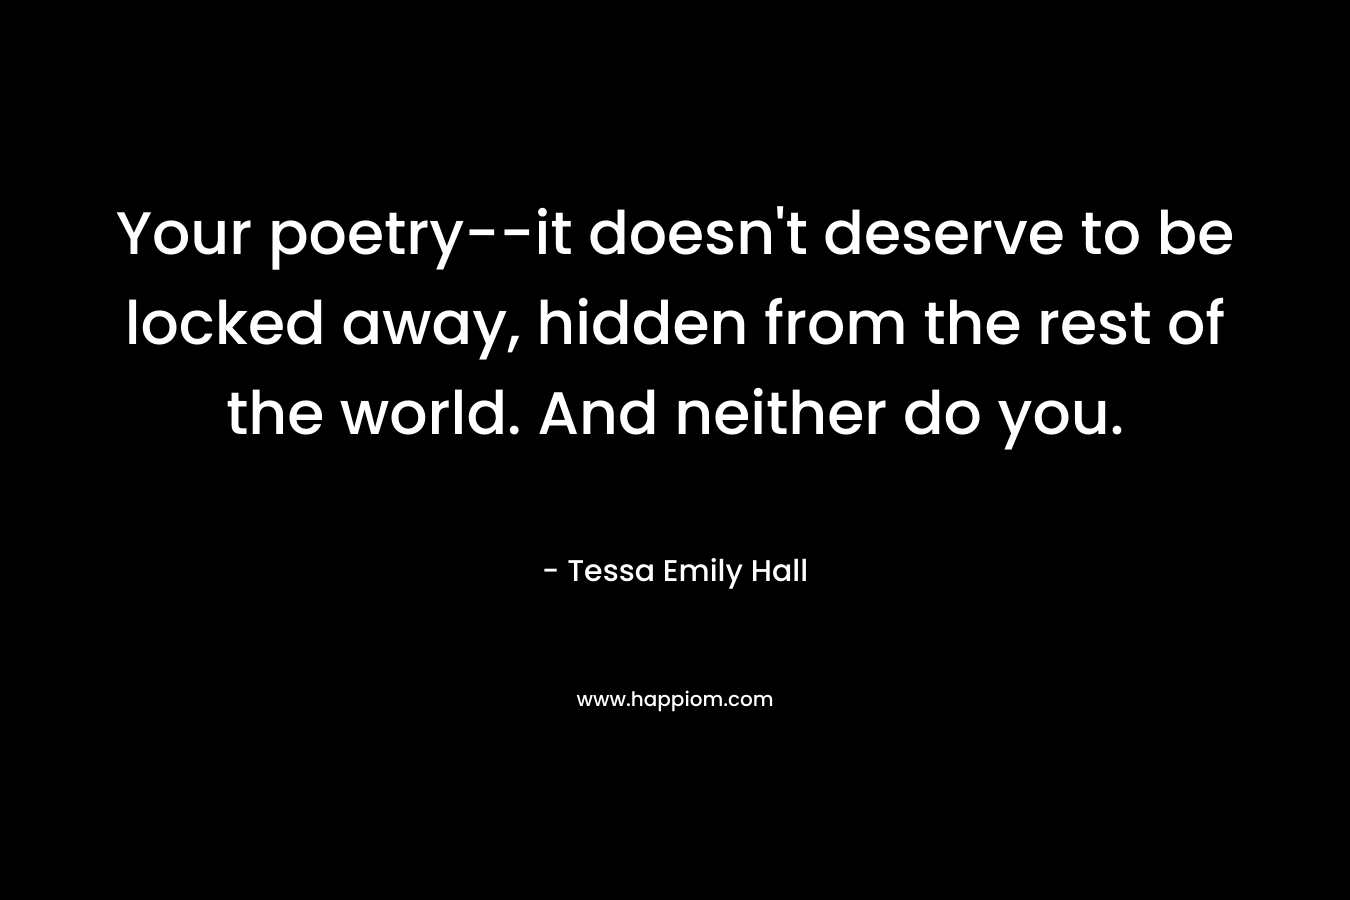 Your poetry–it doesn’t deserve to be locked away, hidden from the rest of the world. And neither do you. – Tessa Emily Hall